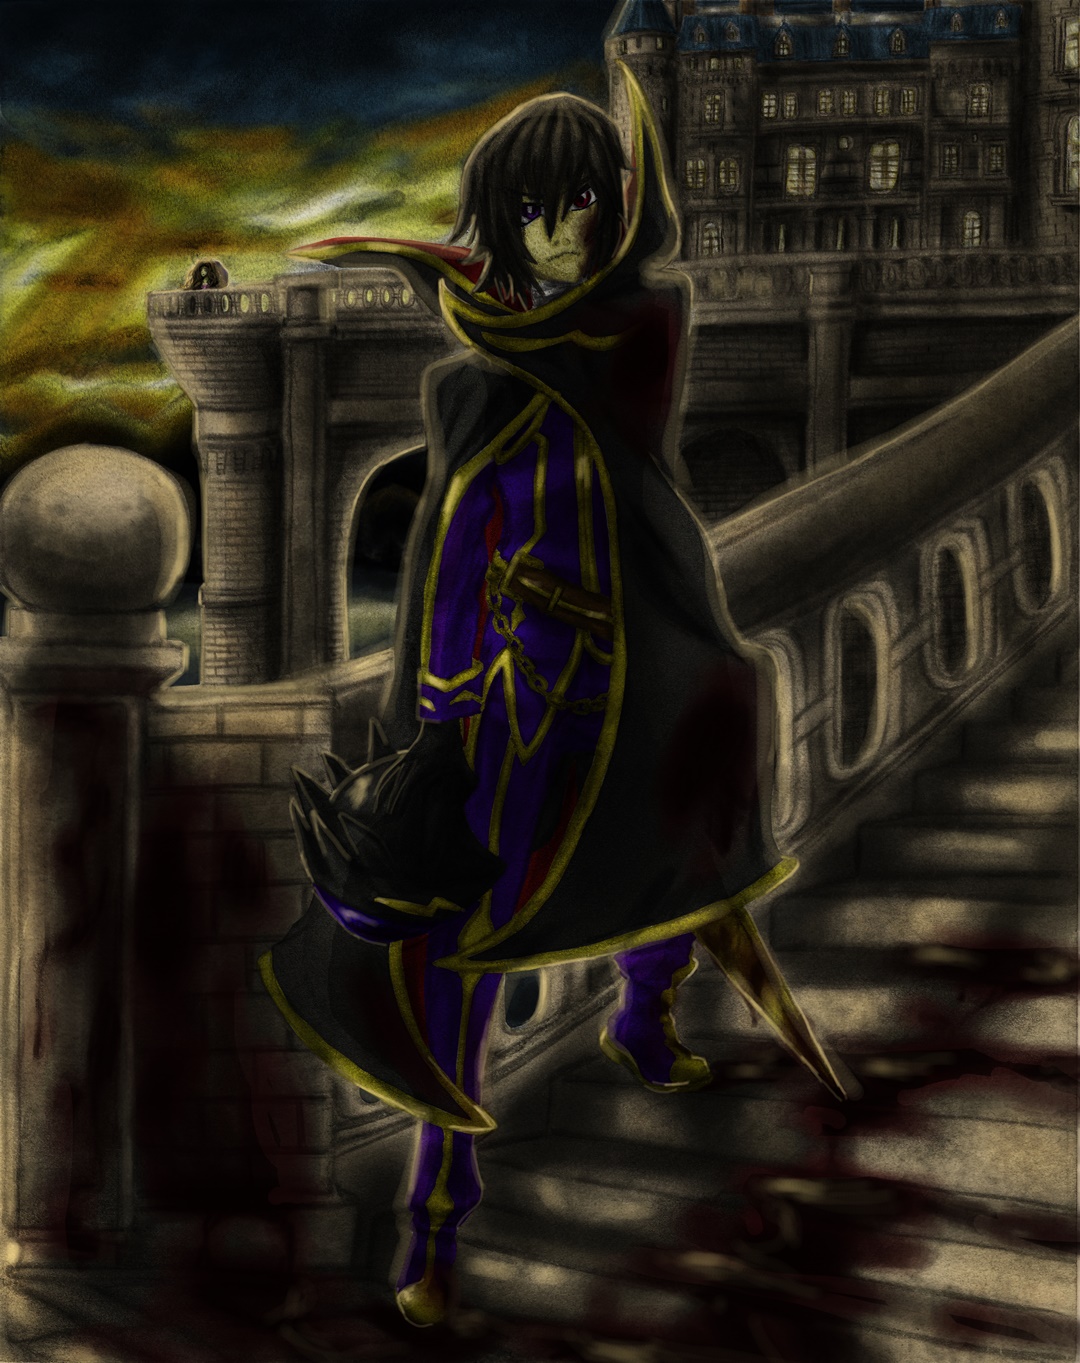 Lelouch - Blood stained gift for her future resize